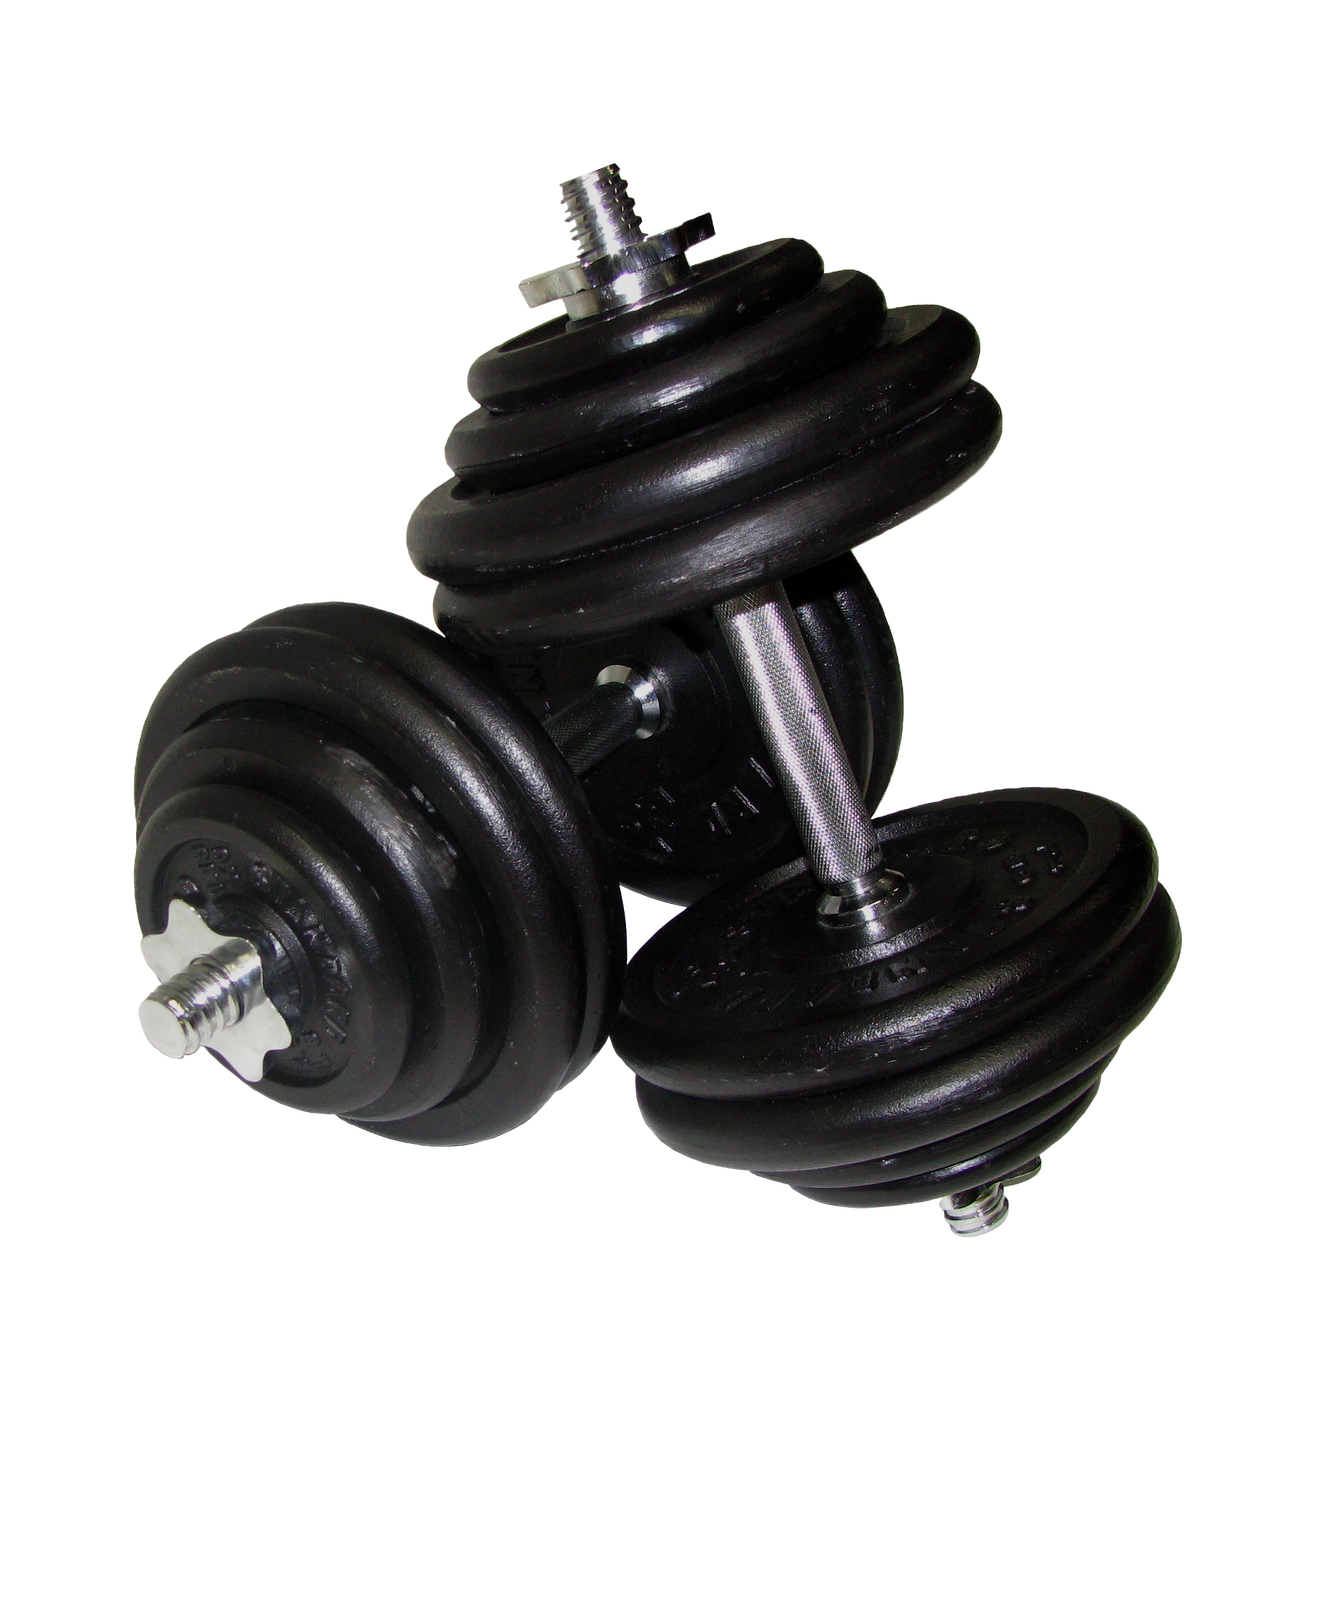 Dumbbell Hd Png Hdpng.com 1337 - Dumbbell, Transparent background PNG HD thumbnail